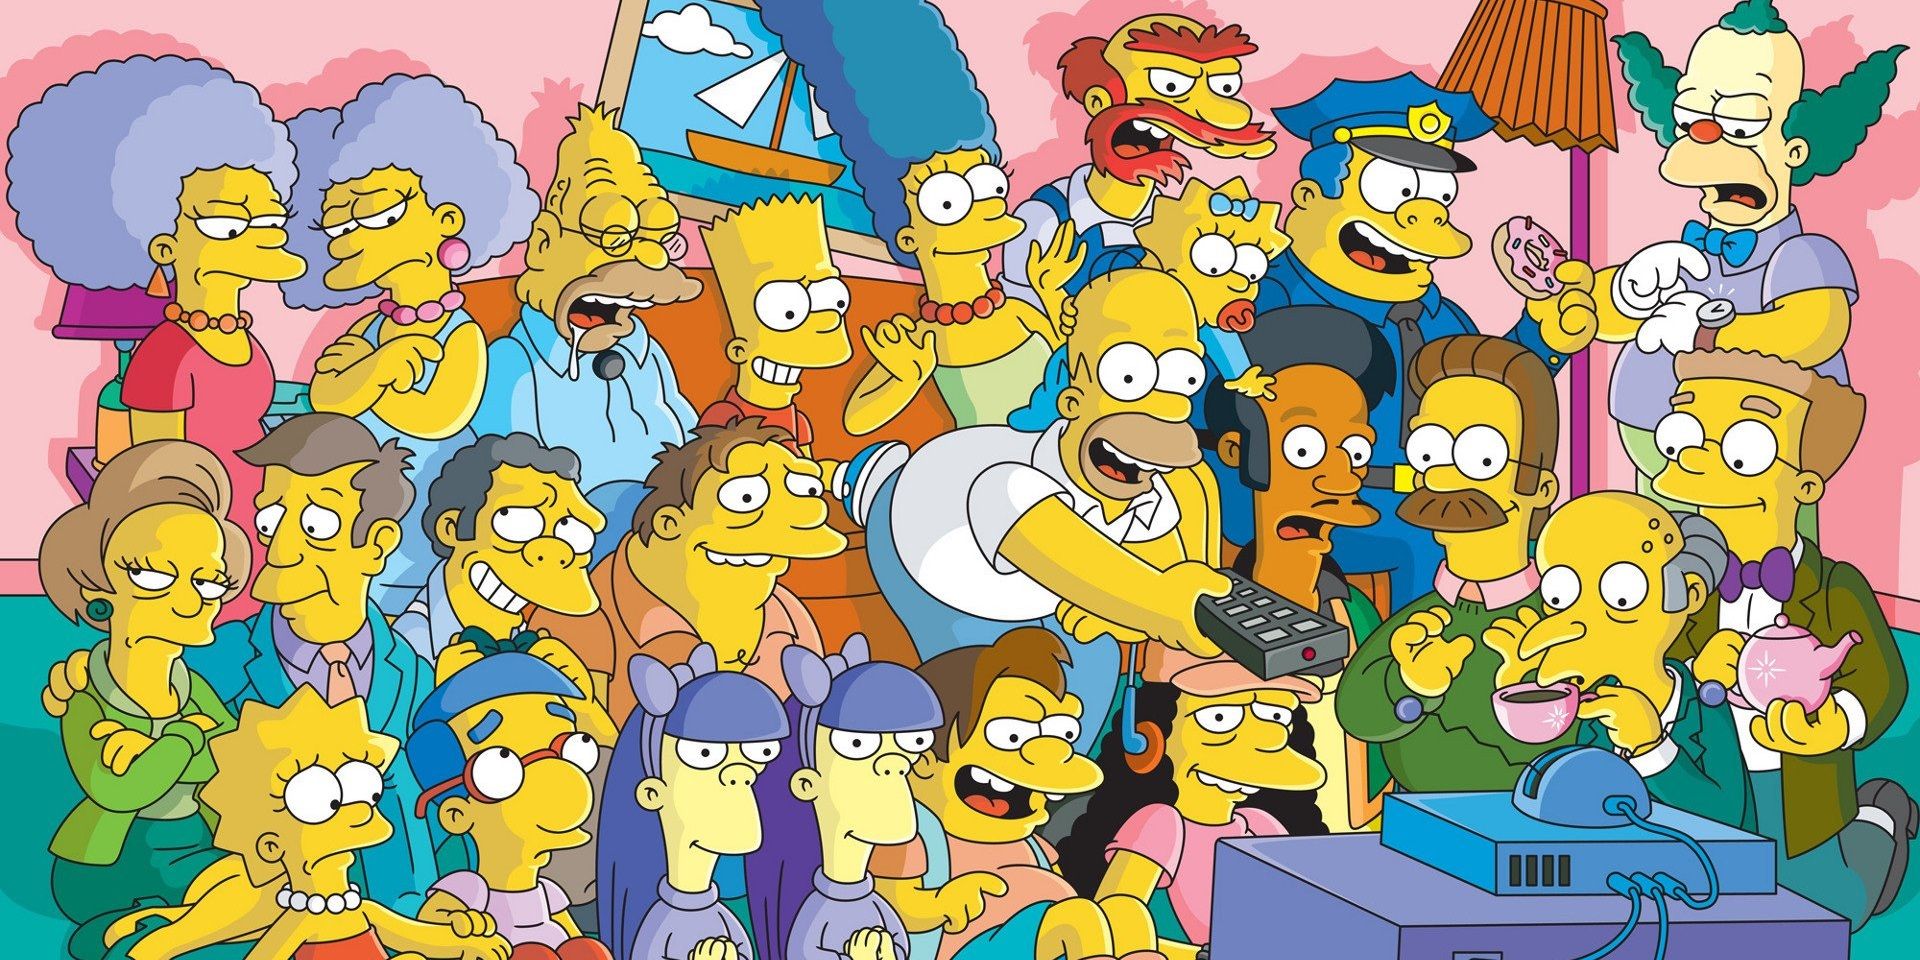 Every character from The Simpsons watching TV